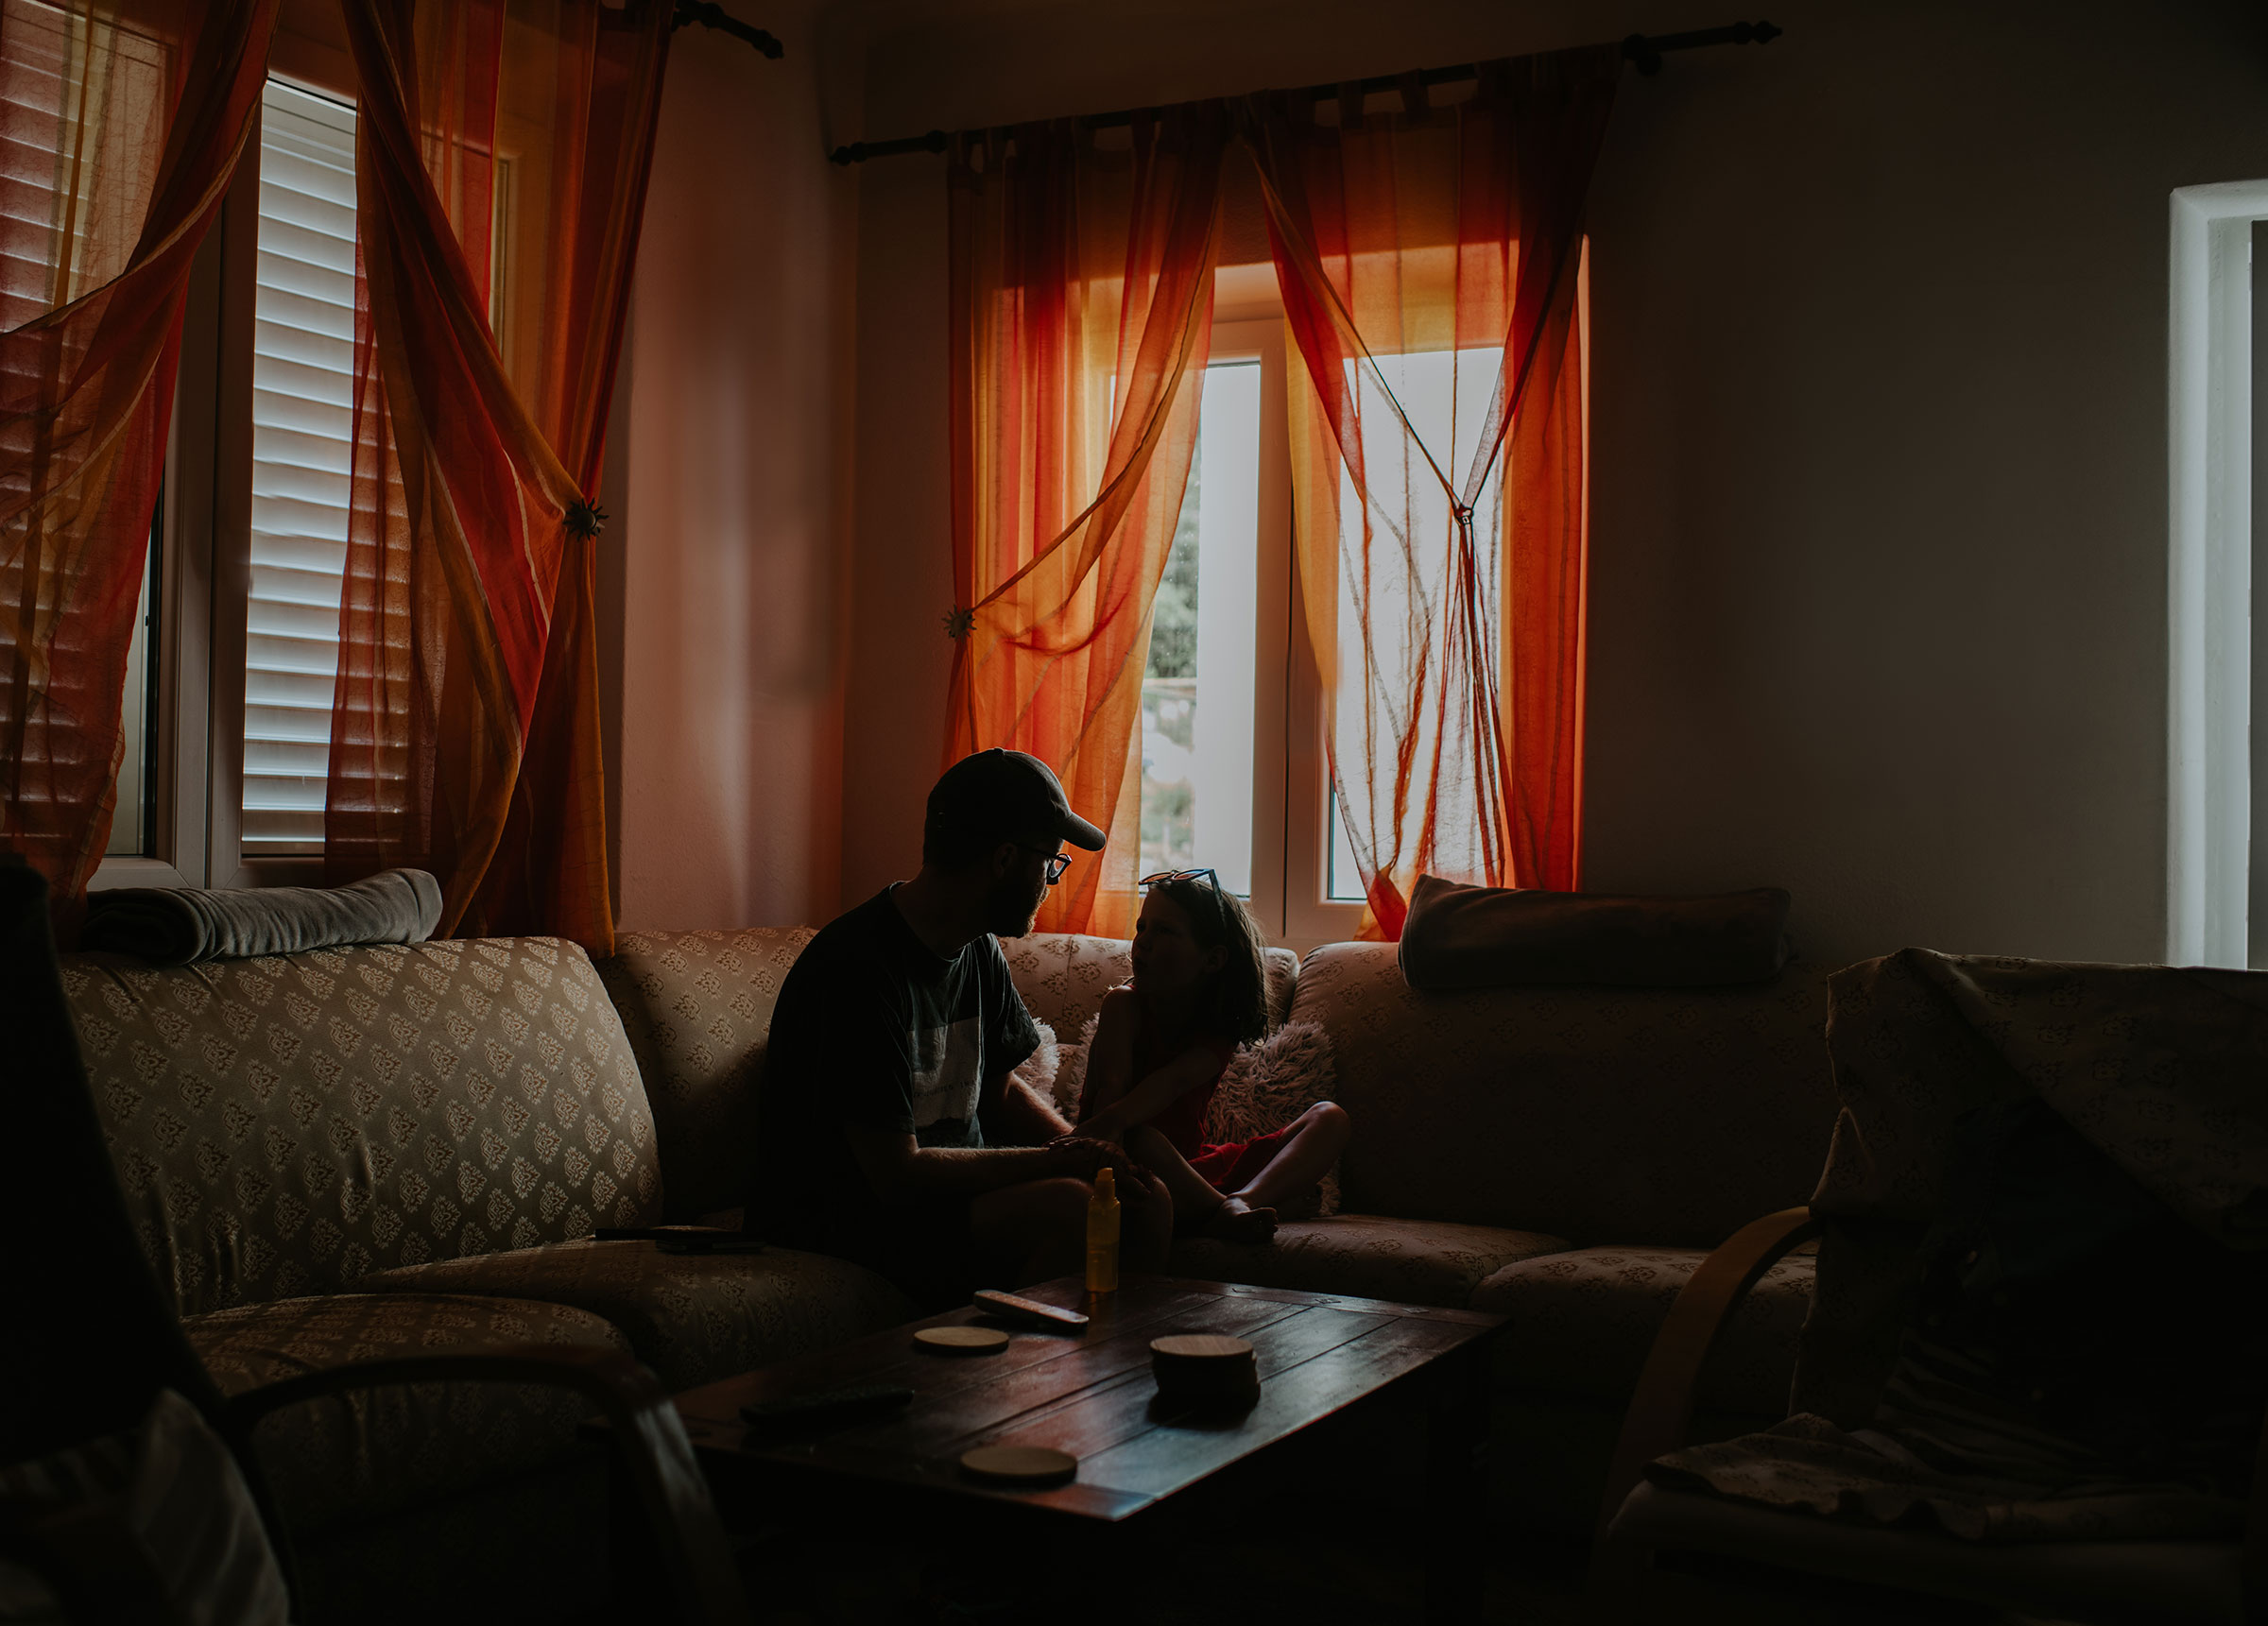 A father and daughter share a quiet moment in a home environment